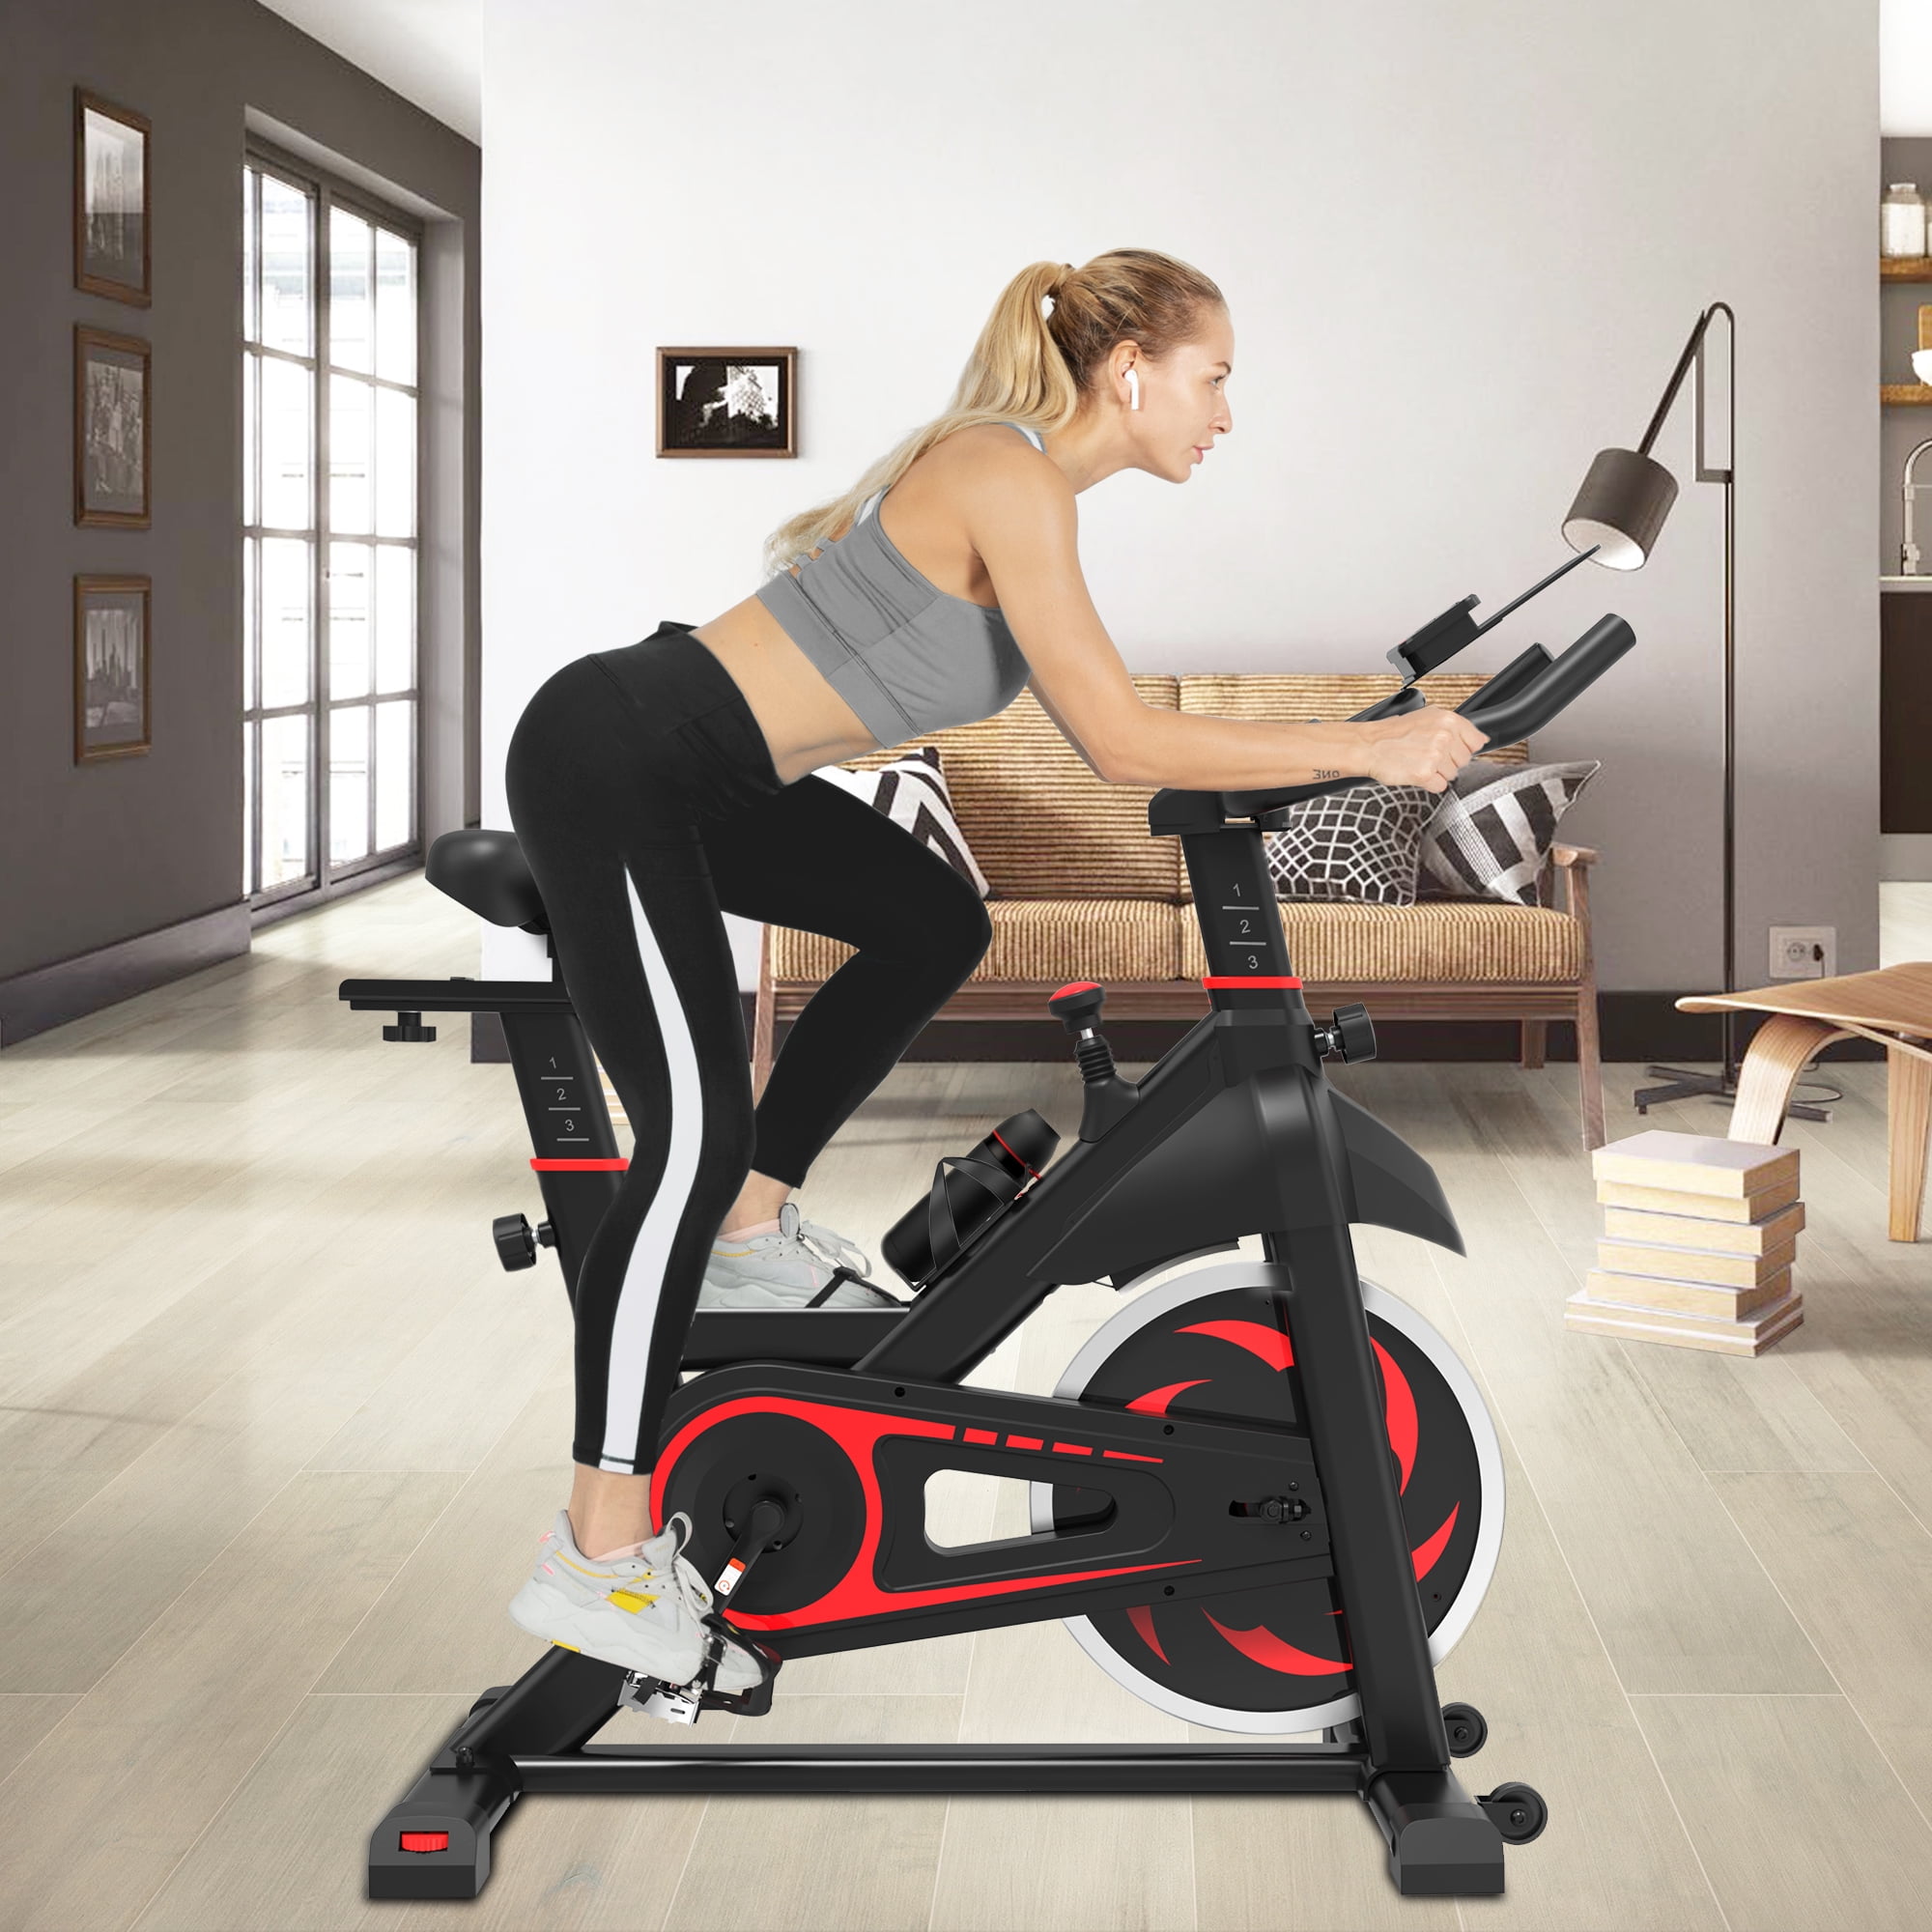 Aerobic Indoor Exercise Bike Cycling Trainer Cardio Fitness Workout Machine 